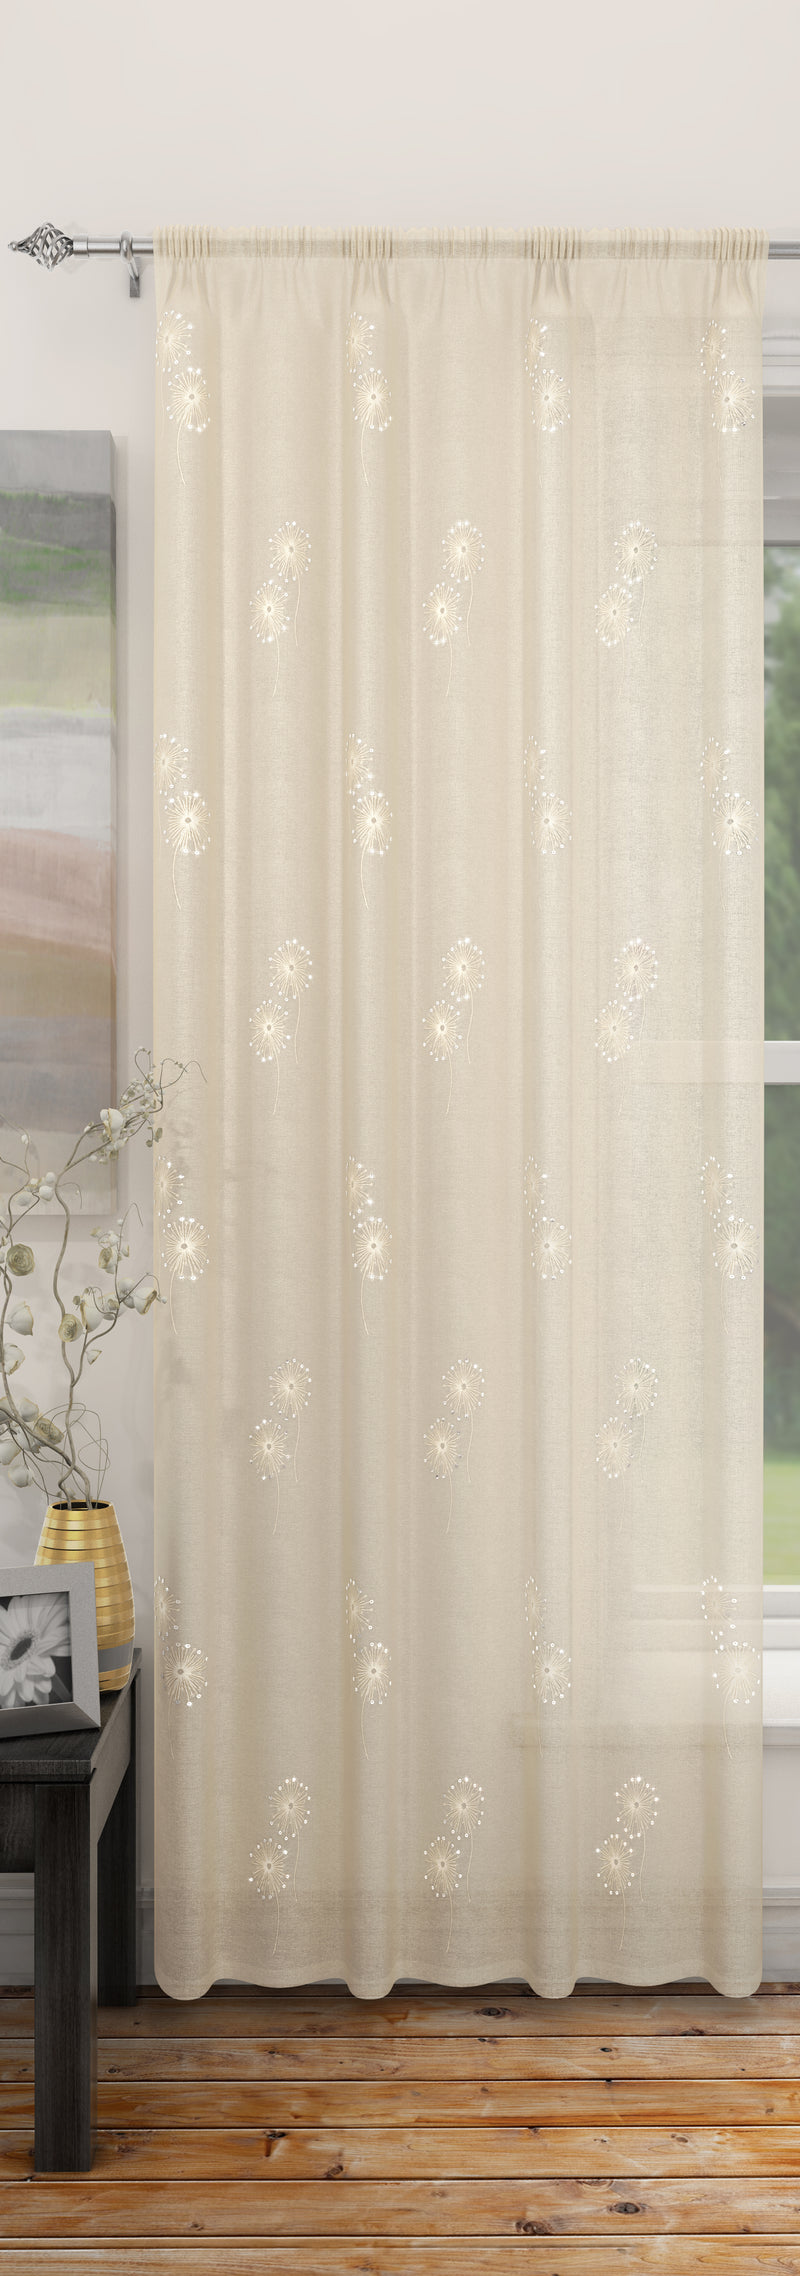 Analise White Embroidered Voile Panel